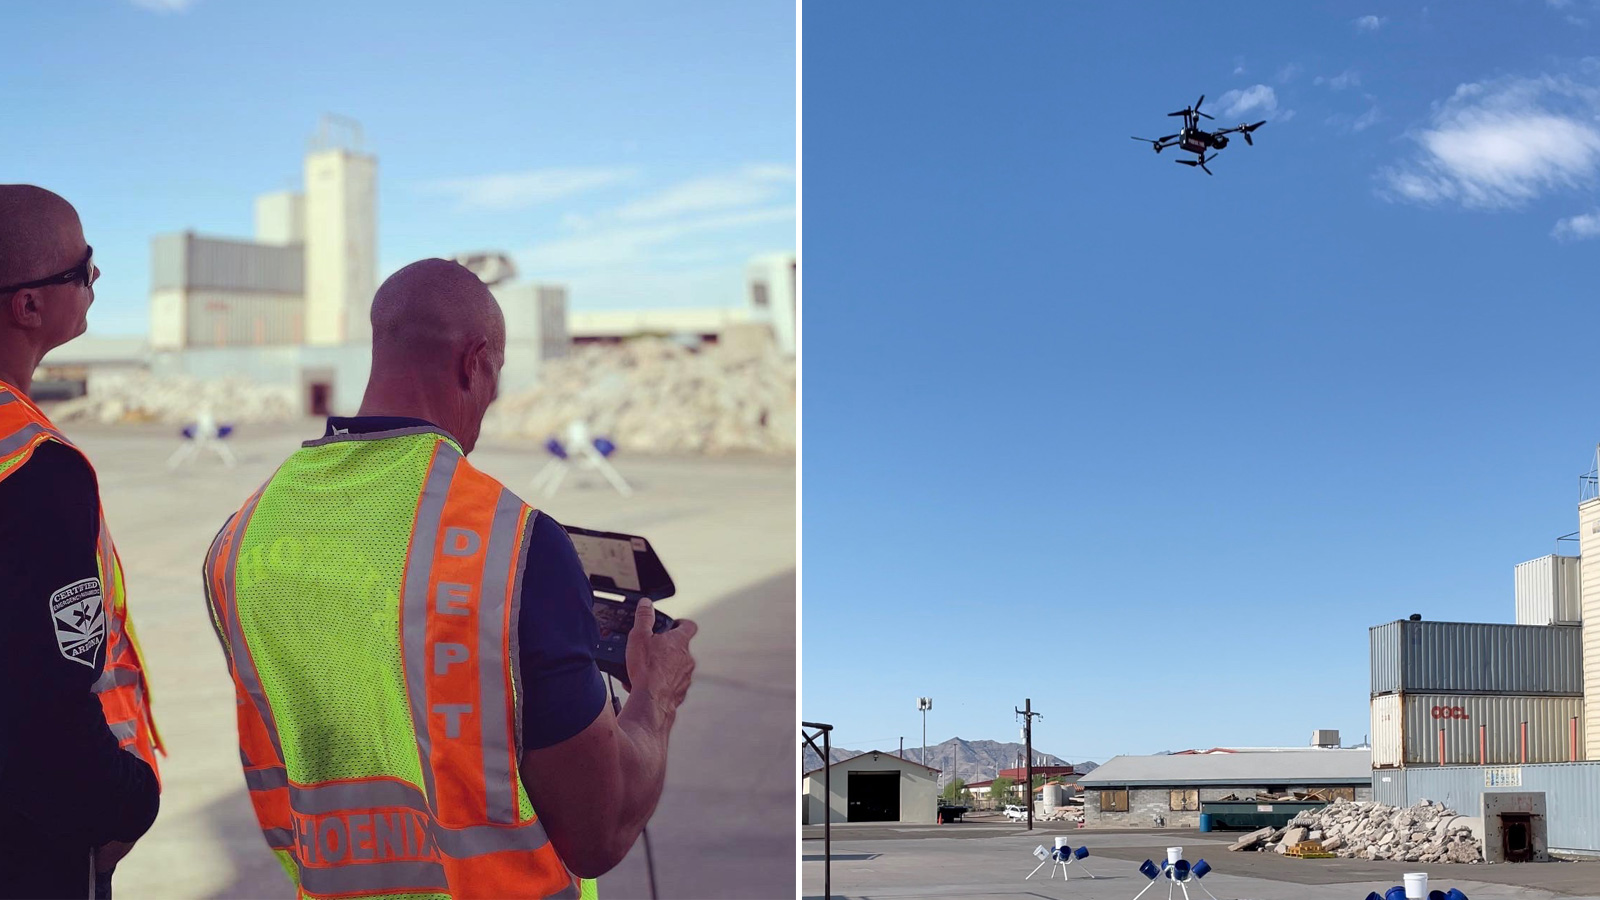 Phoenix Fire Department using drones as a life-saving tool